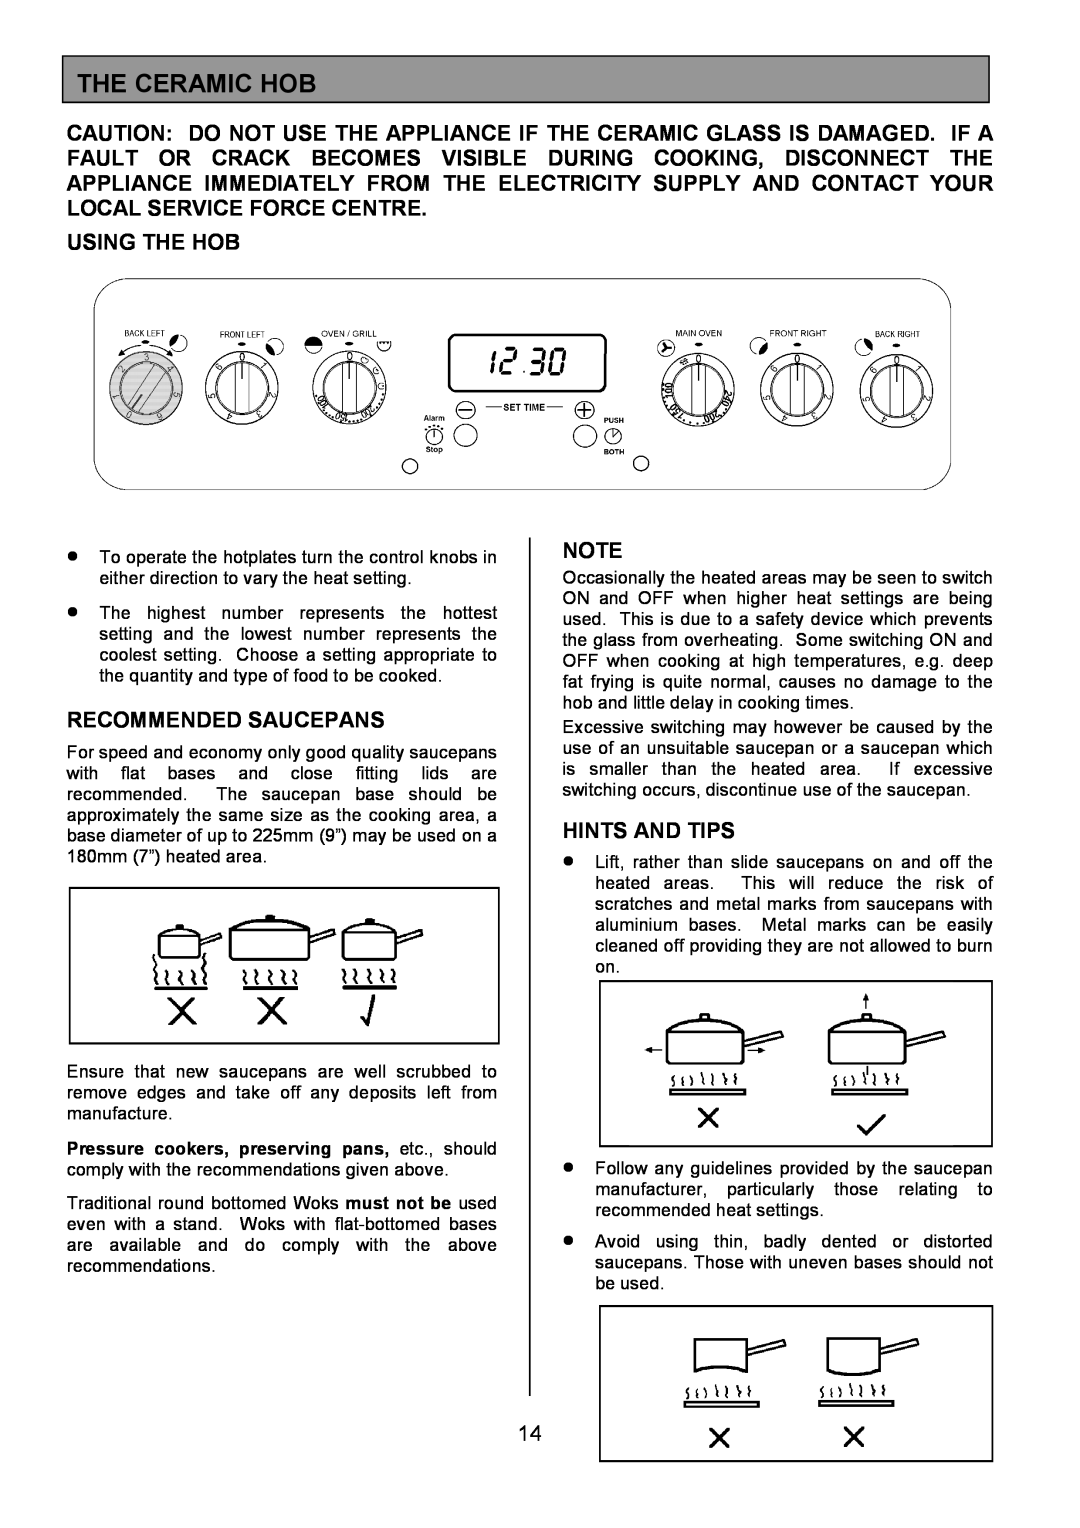 Tricity Bendix SE553 installation instructions The Ceramic Hob, Using The Hob, Recommended Saucepans, Hints And Tips 